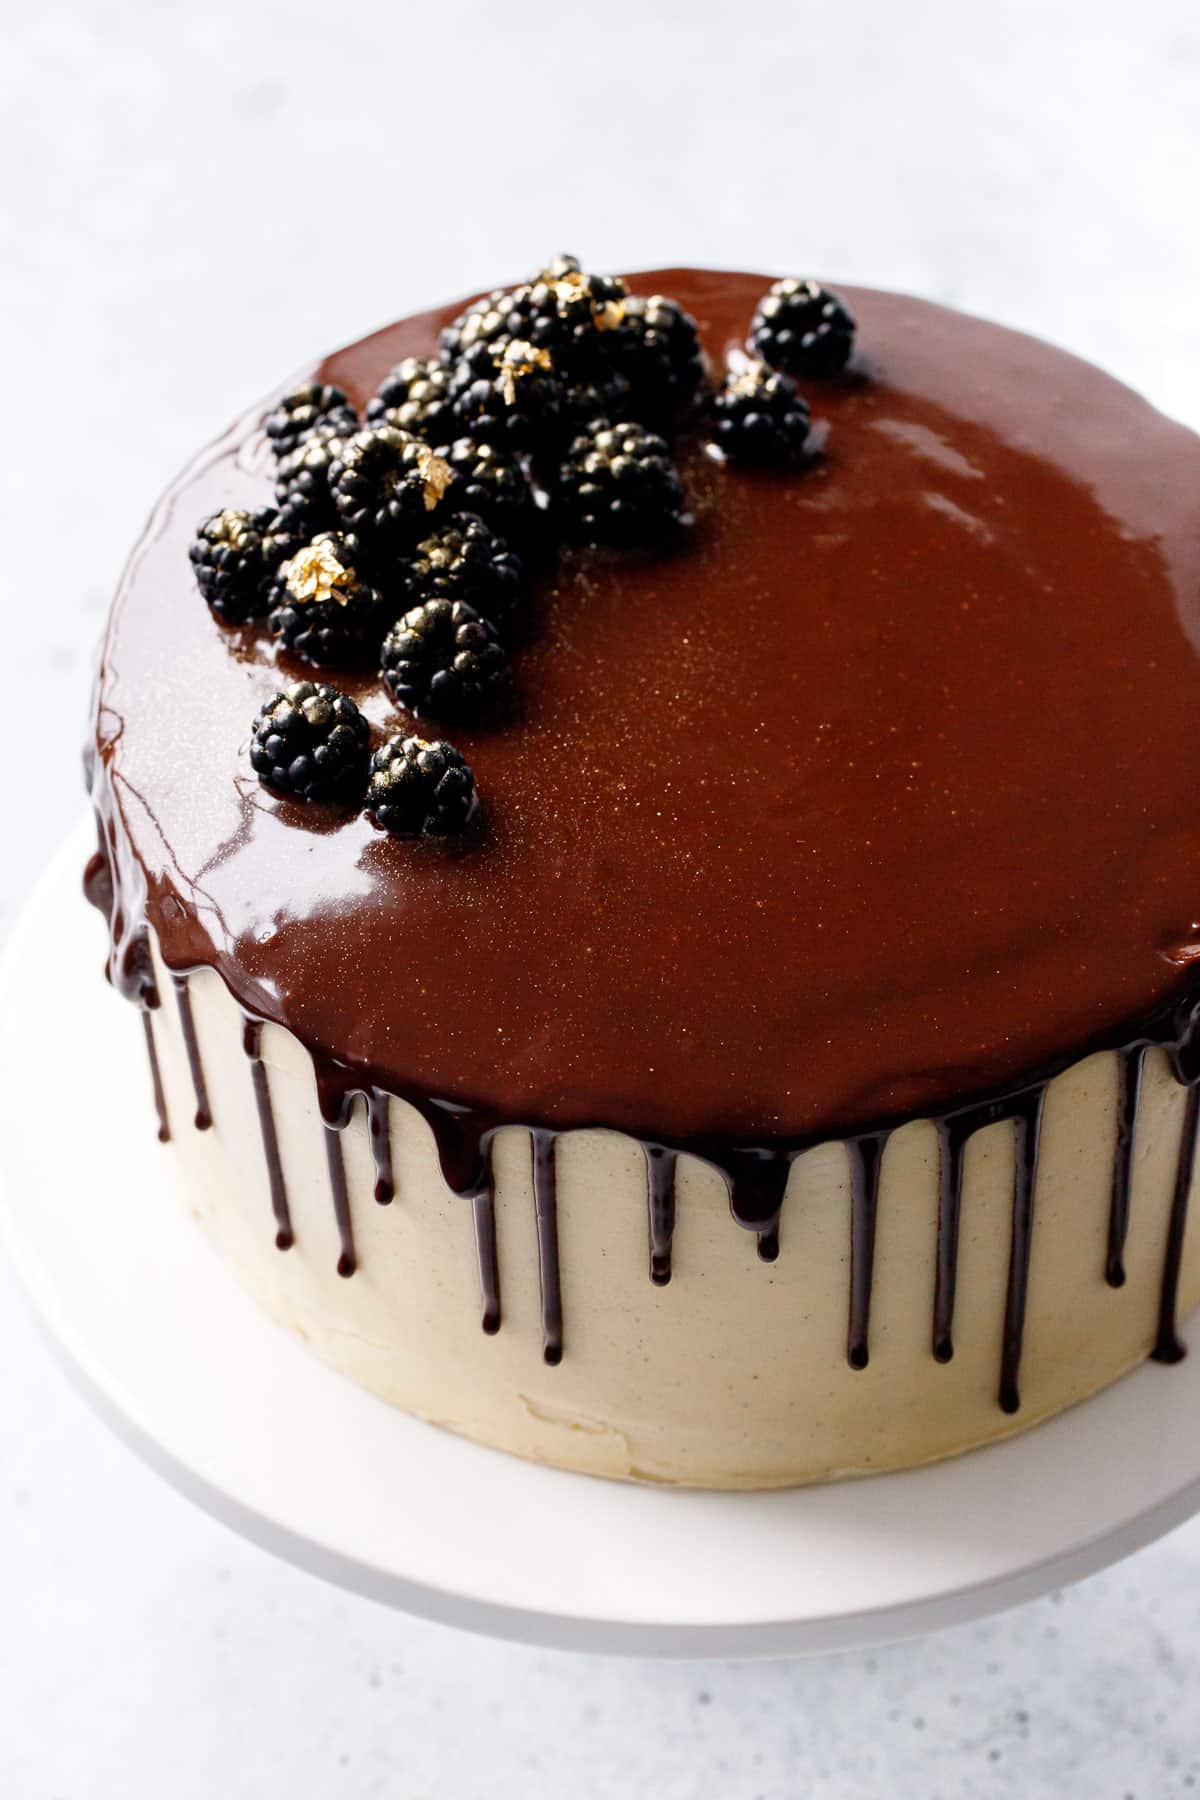 Blackberry Red Wine Chocolate Cake with shiny chocolate glaze dripping down the sides, with gold-dusted blackberries as decoration.